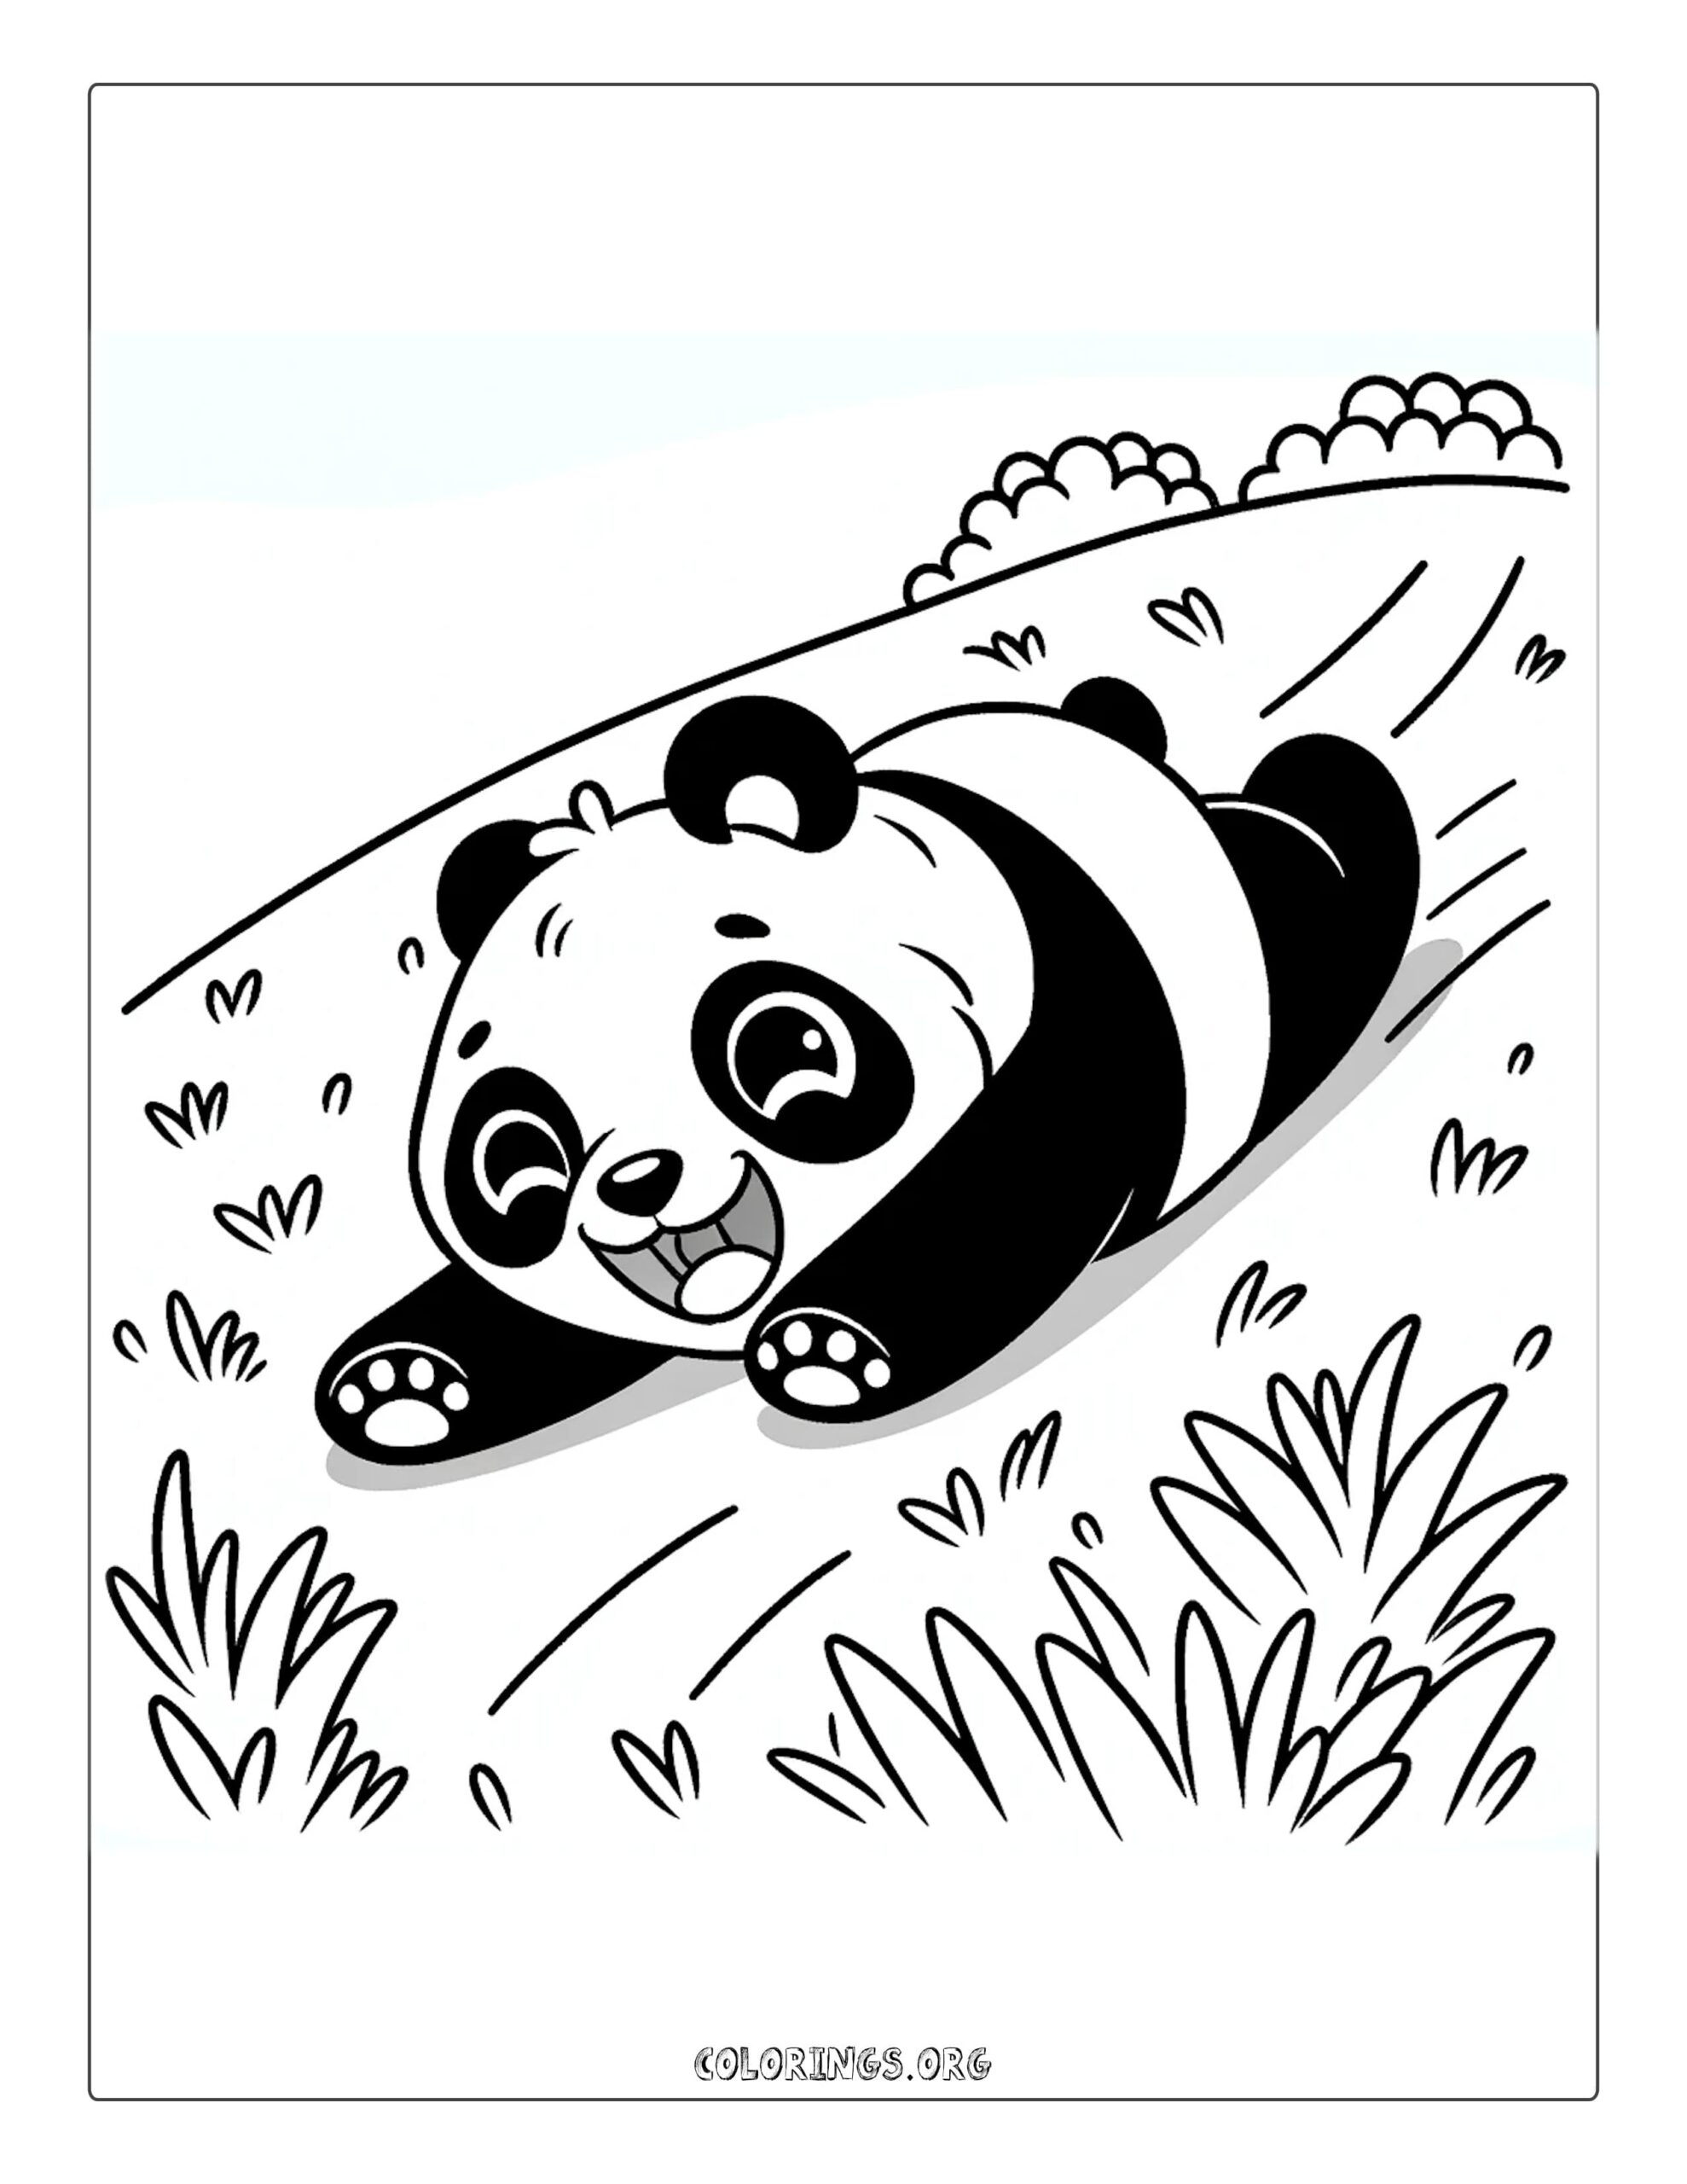 Playful Panda Rolling Down Hill Coloring Page